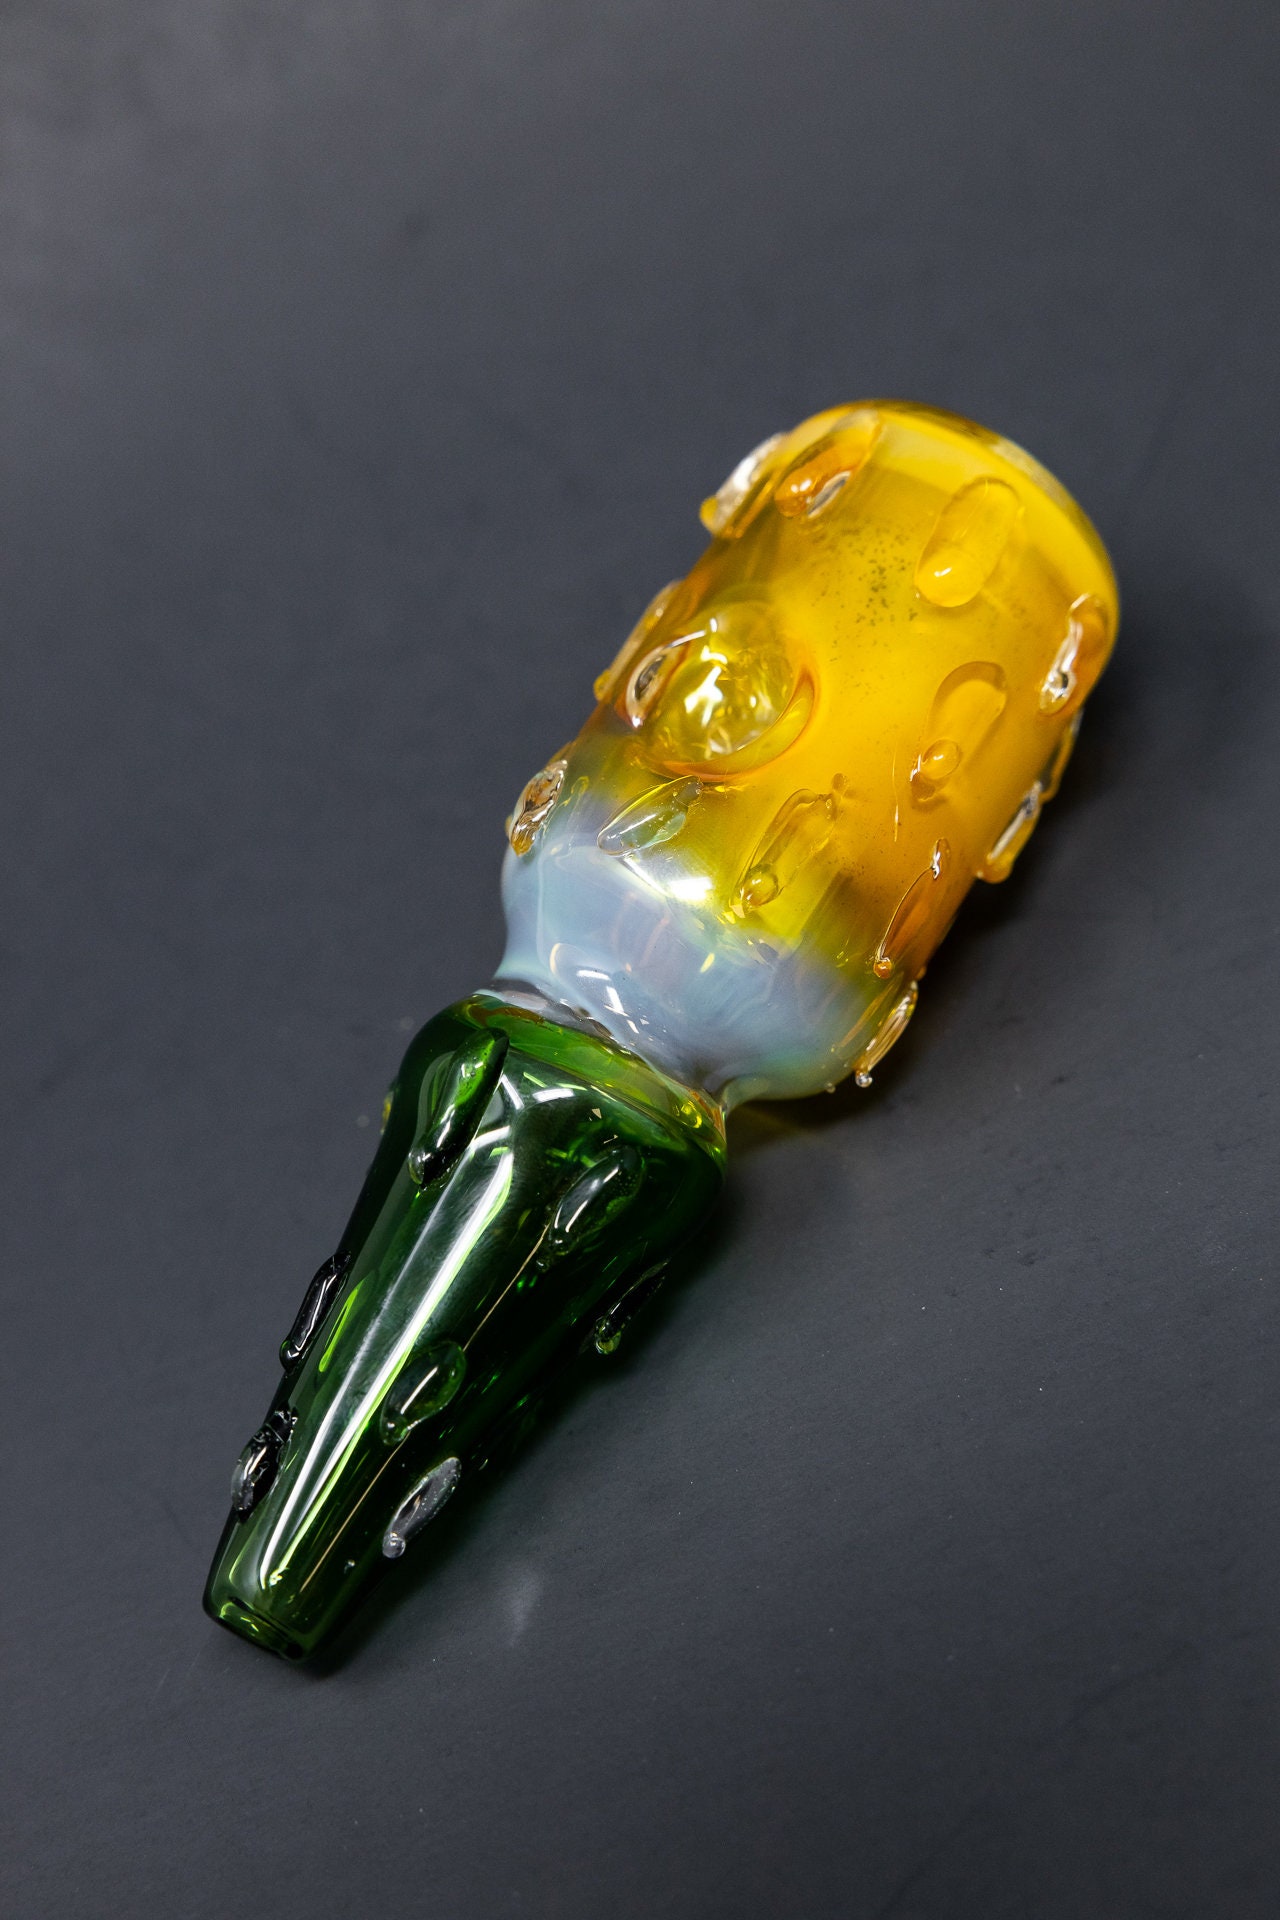 Pineapple Vintage-styled Unique Glass Pipes for Smoking, Cute Smoking Bowl,  Fruit Pipe Gift, Pineapple Pipe, Adult Gifts, Food Pipe 